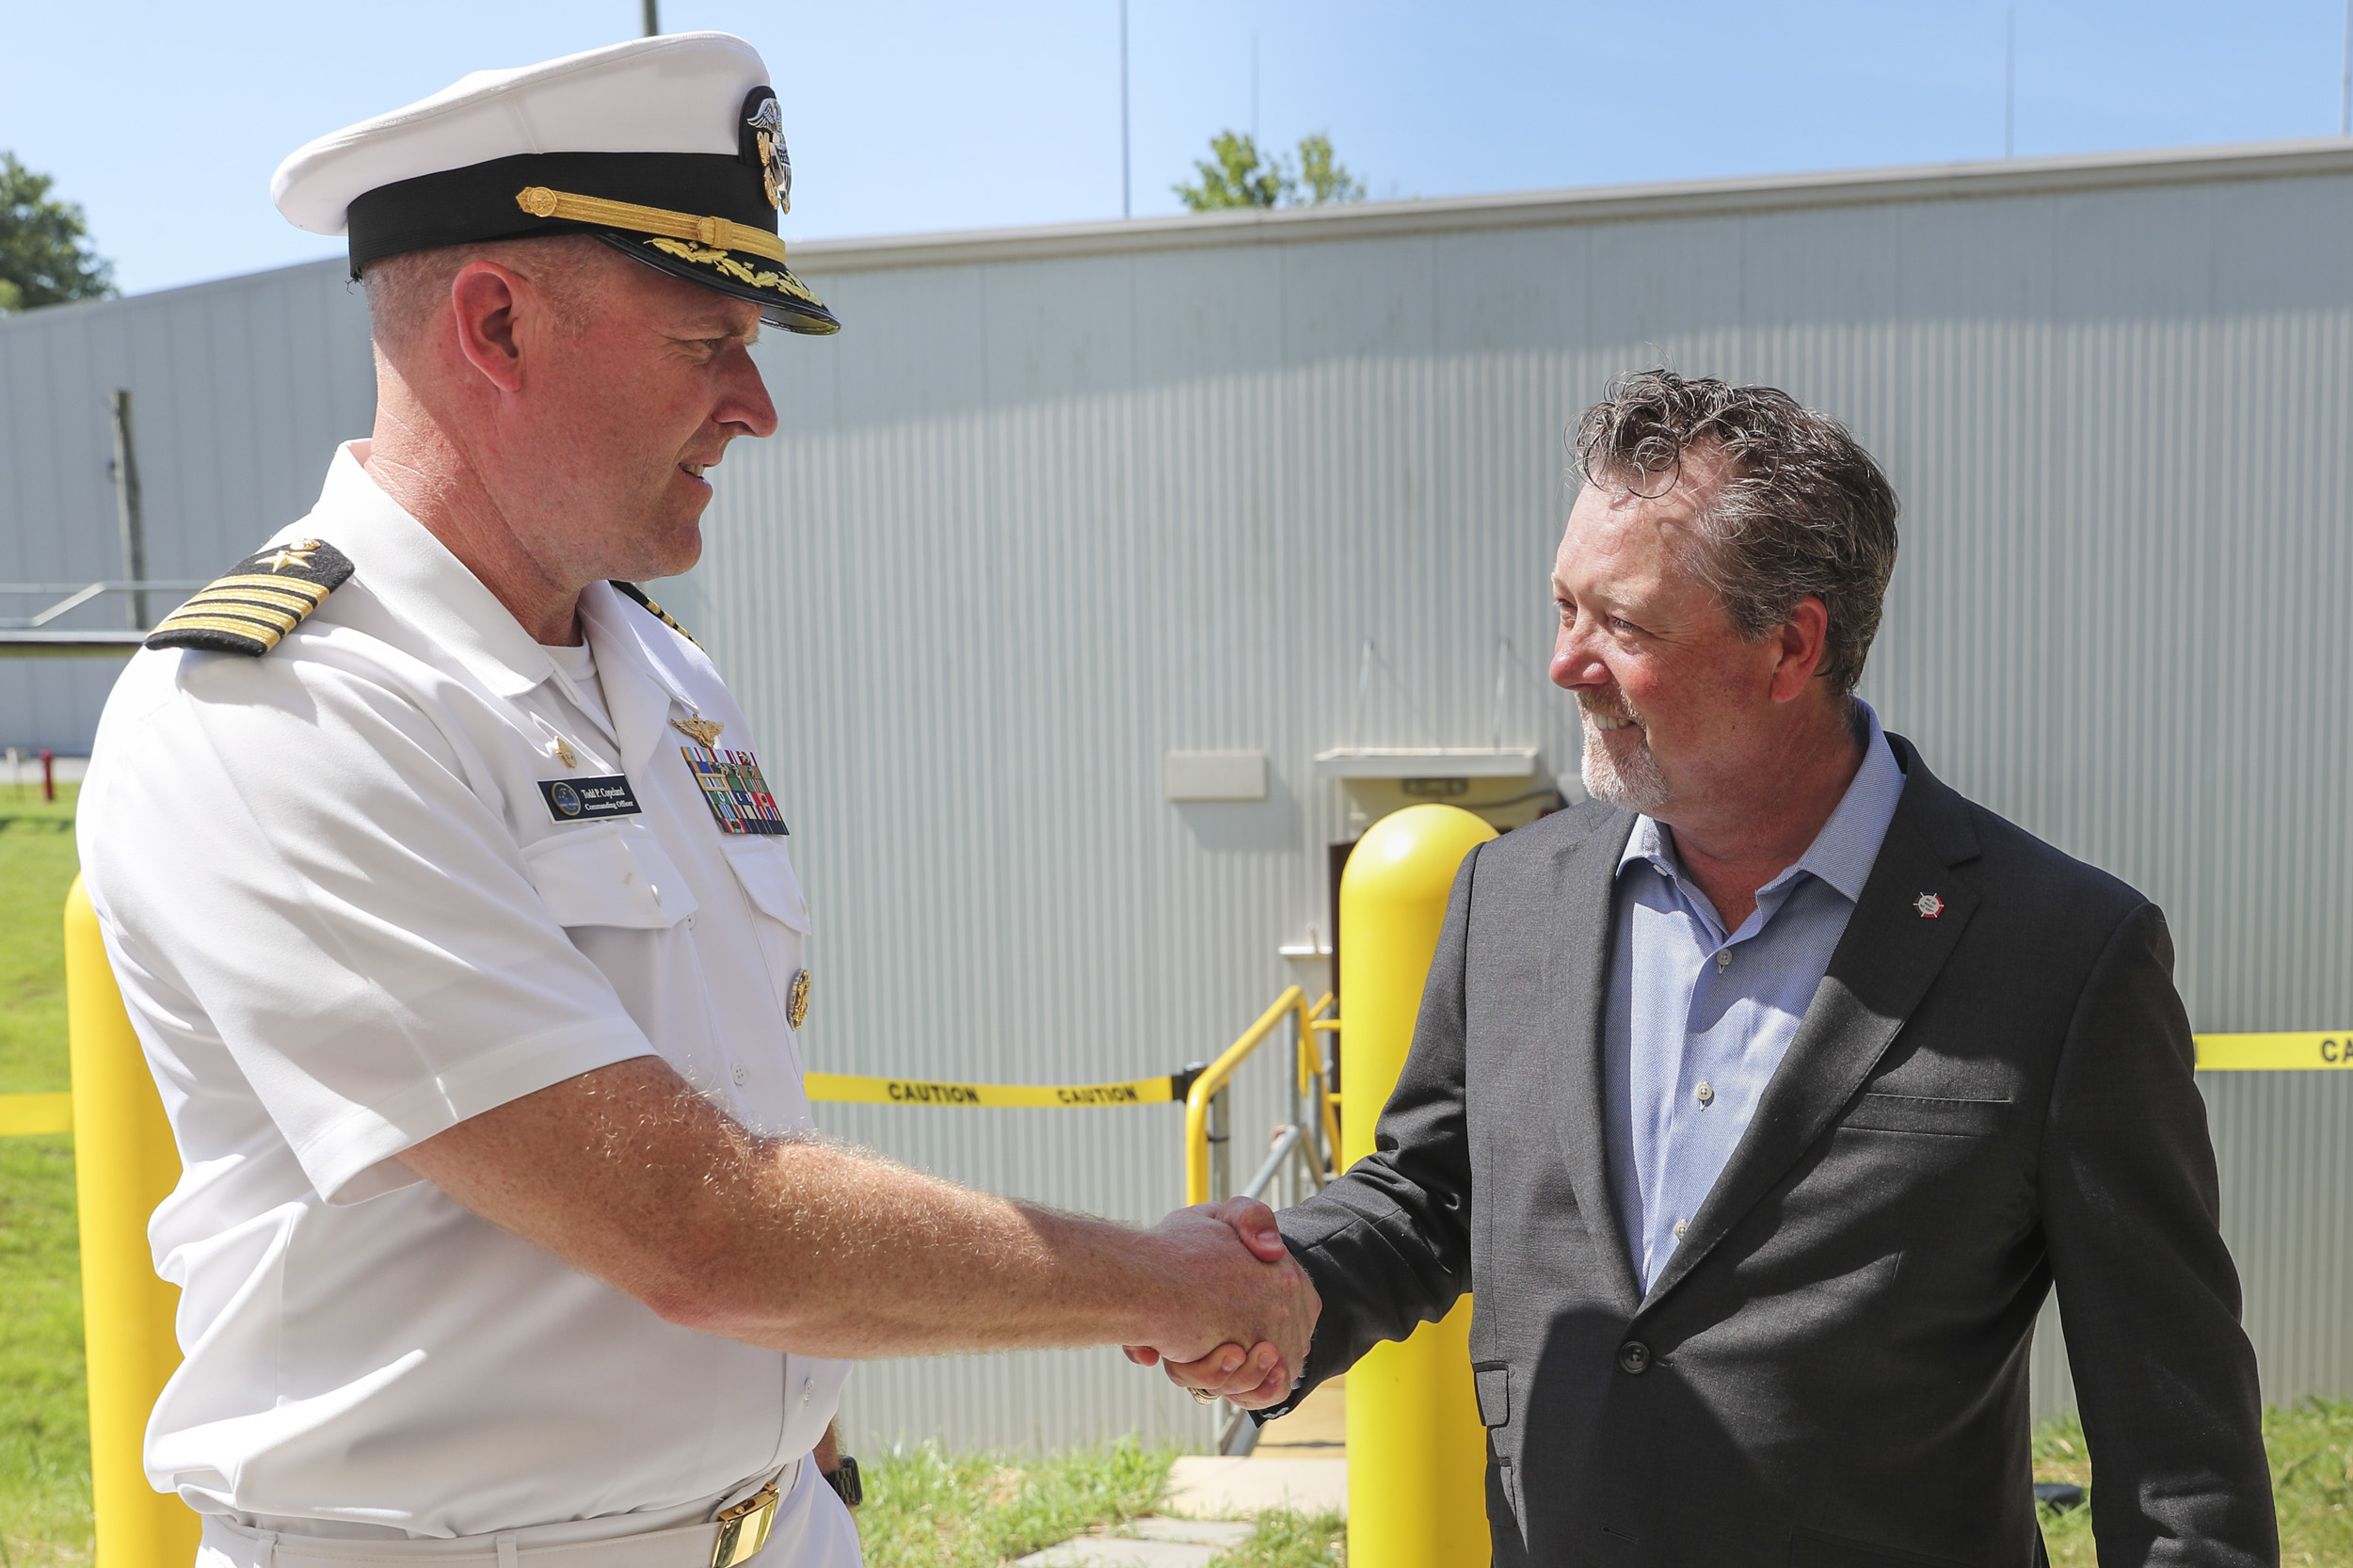 Mason & Hanger Proudly Attends Agile Chemical Facility Ribbon Cutting Ceremony at the Naval Surface Warfare Center Indian Head Division